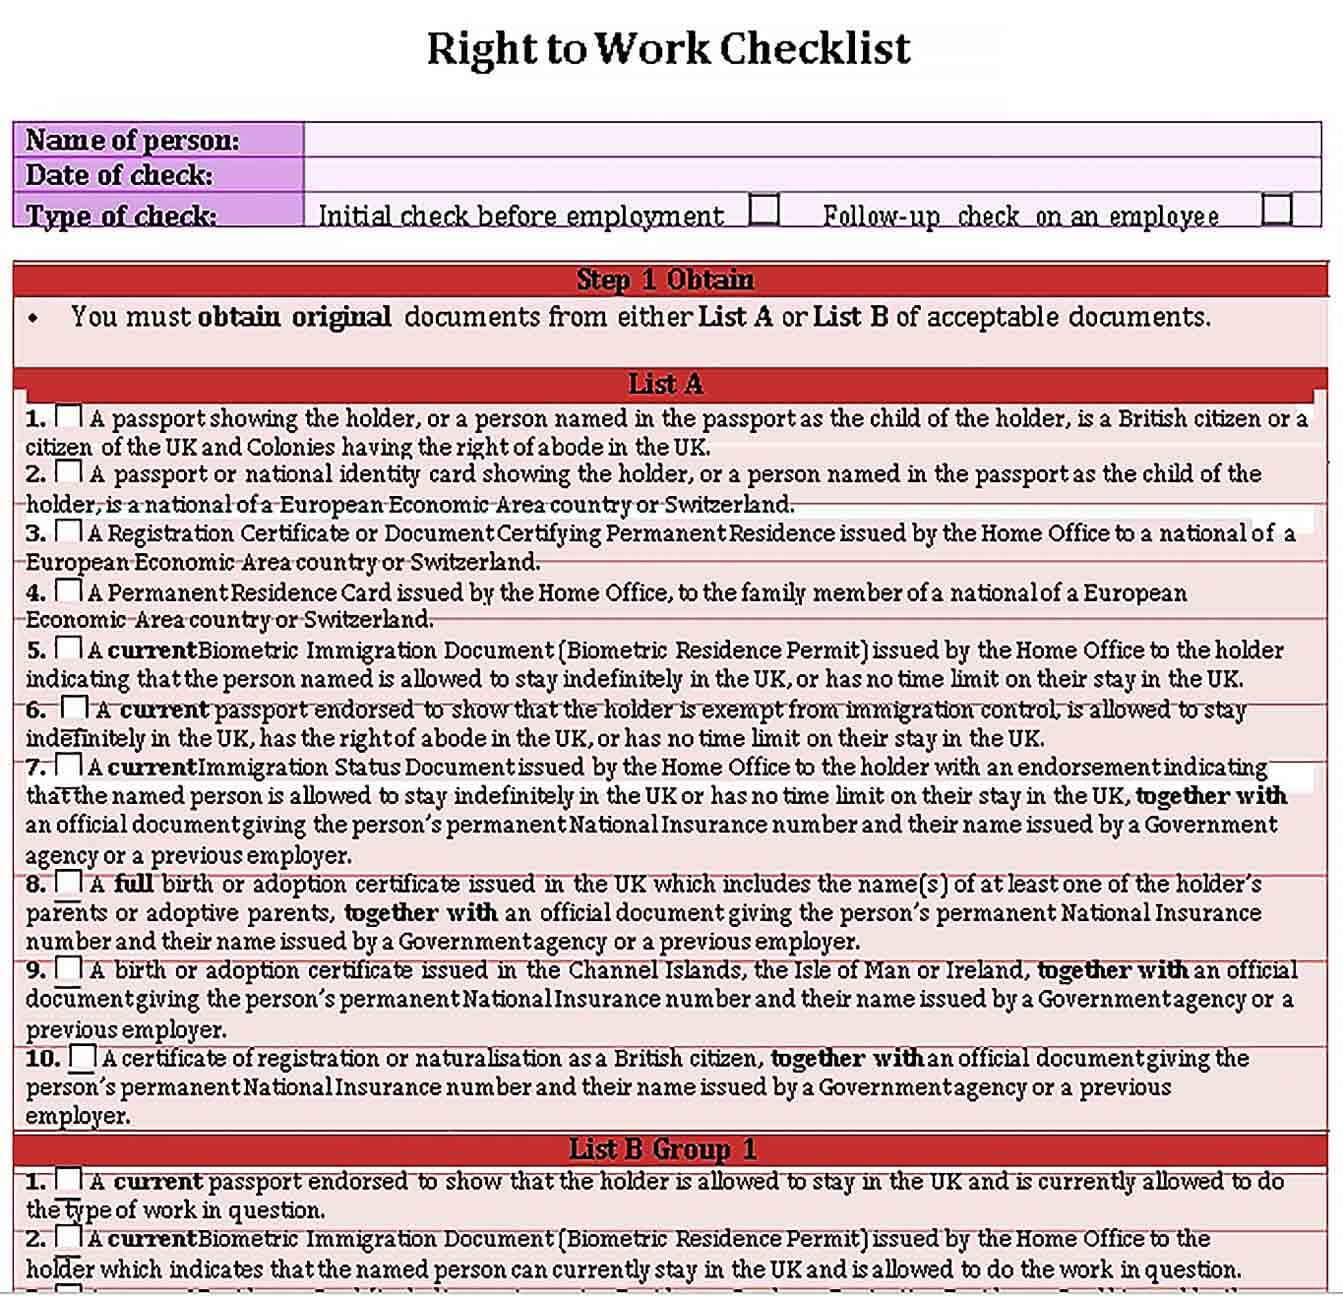 Sample Right to Work Checklist